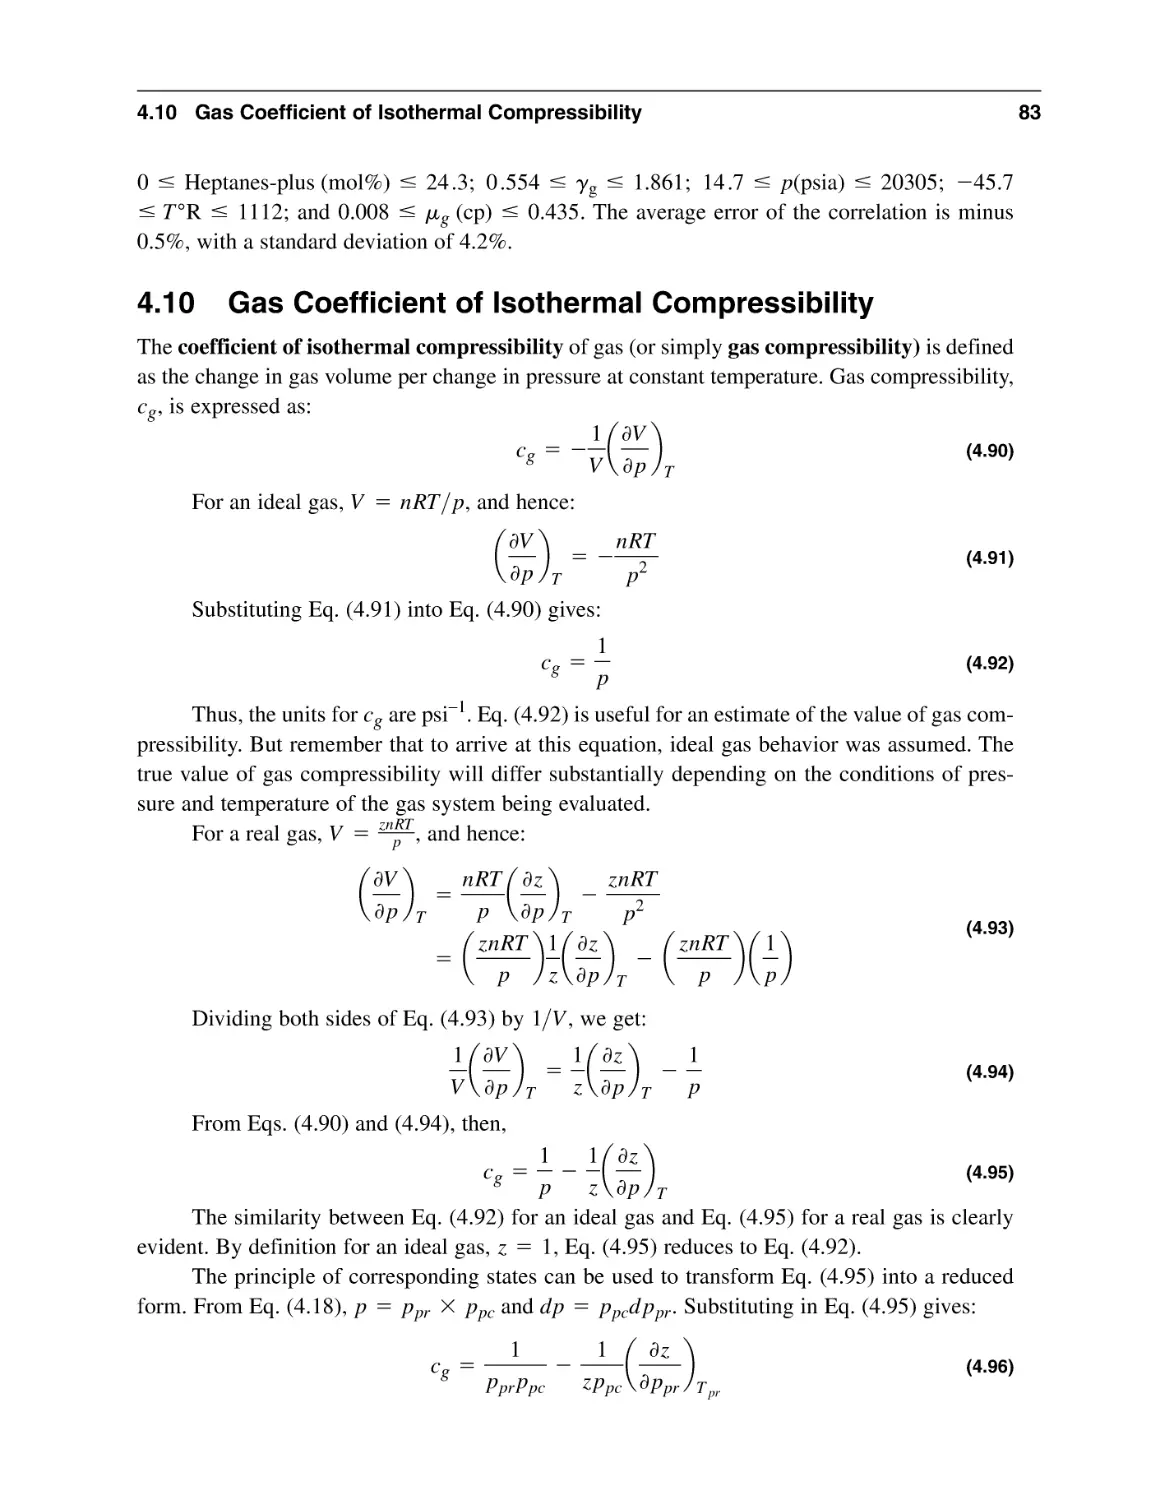 4.10 Gas Coefficient of Isothermal Compressibility